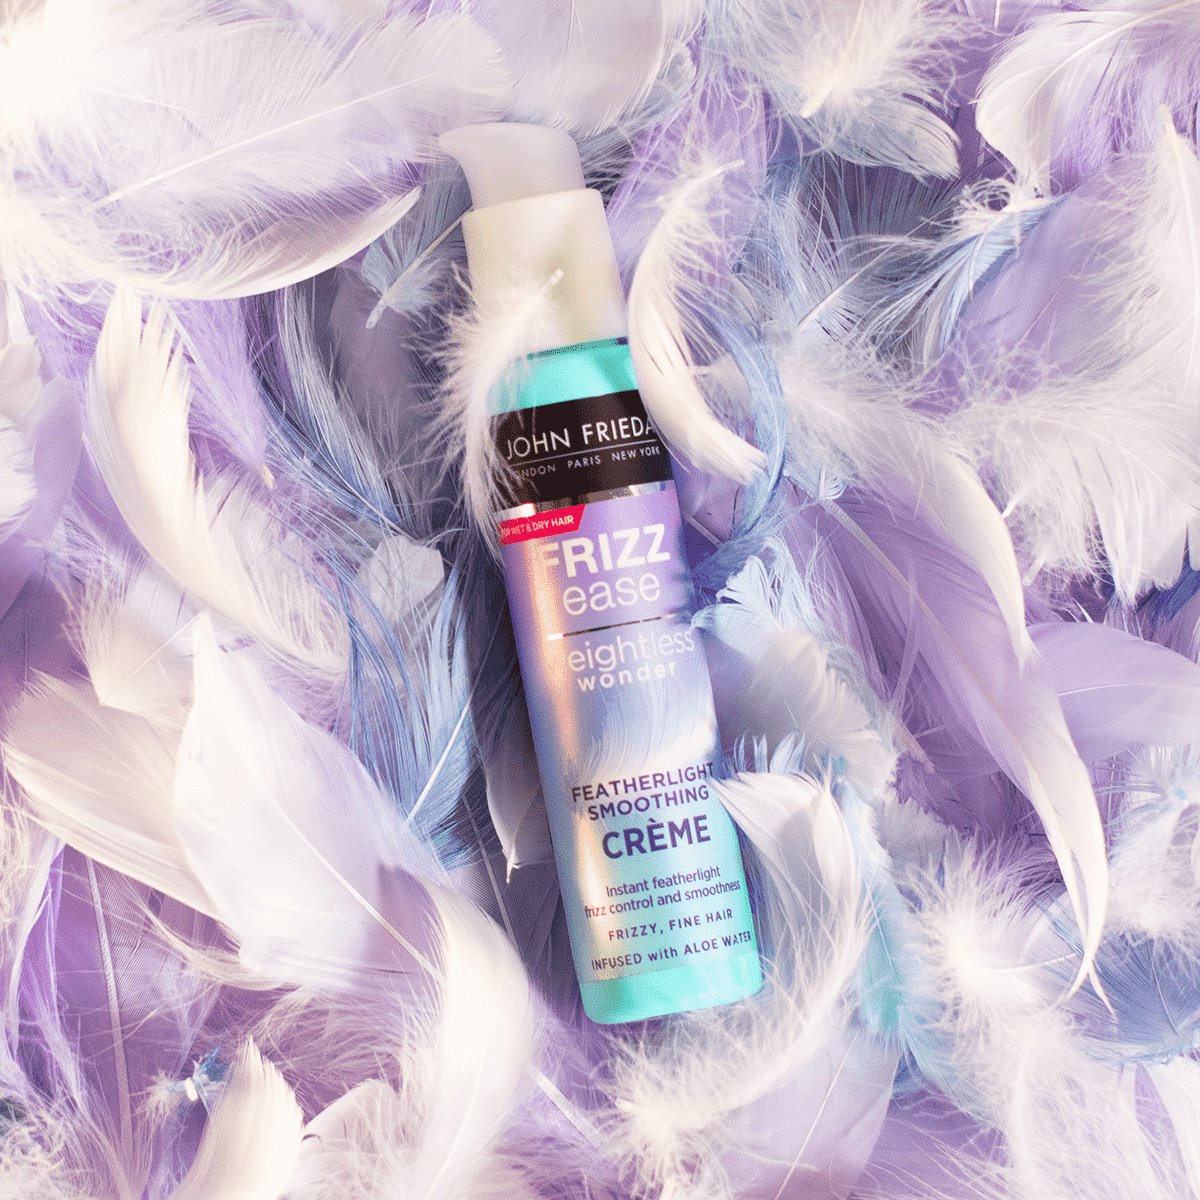 John Frieda product surrounded by feathers